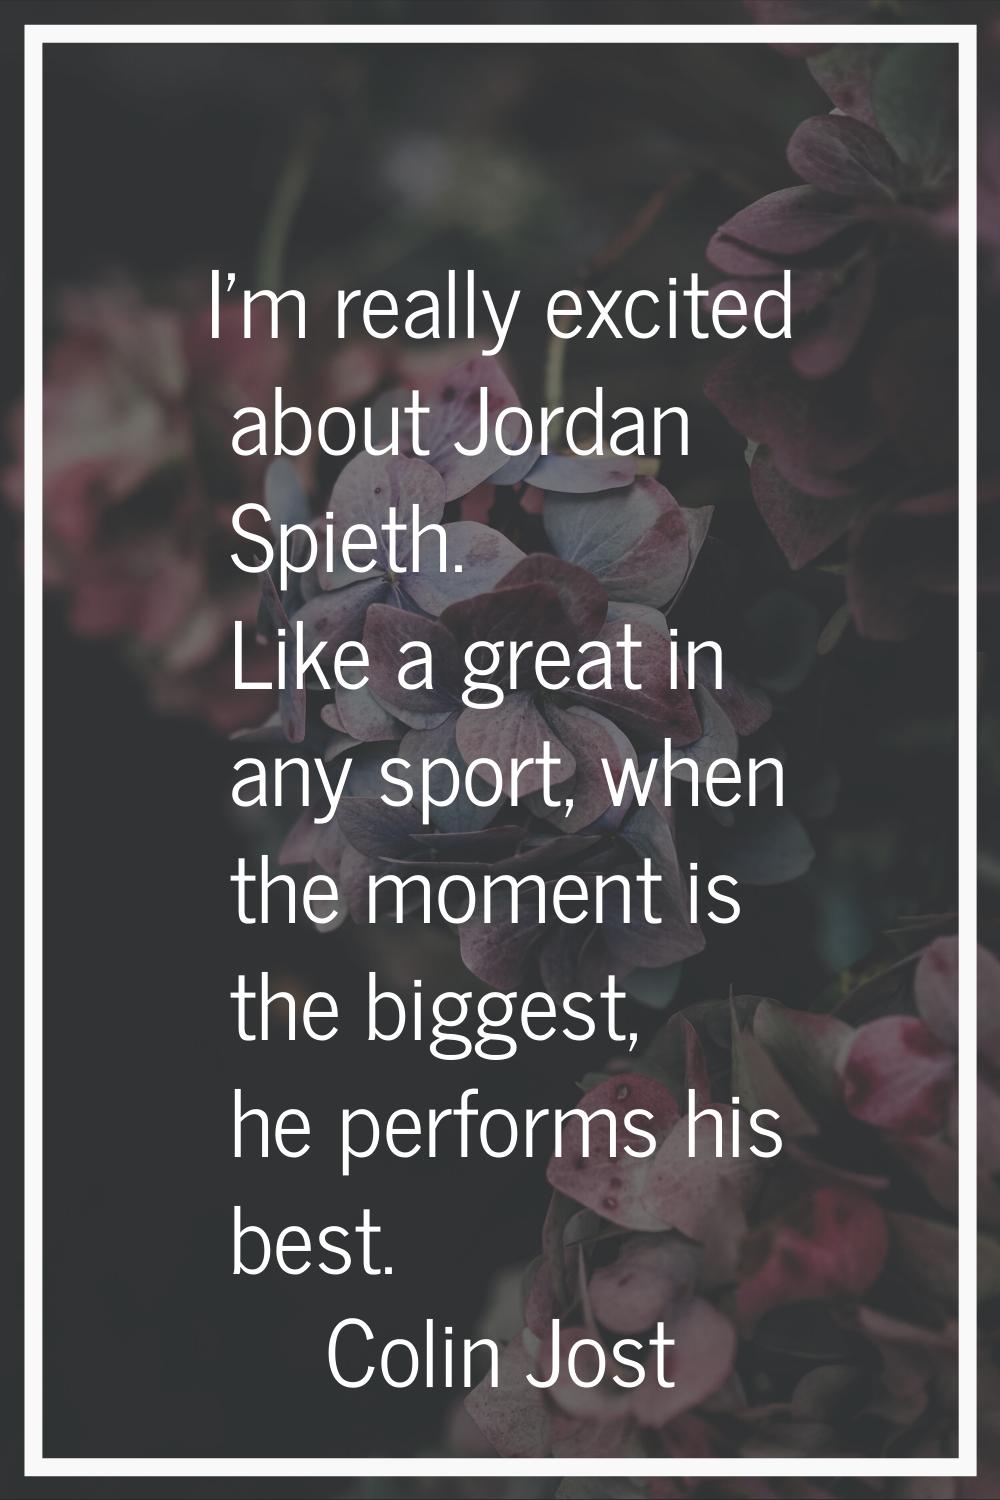 I'm really excited about Jordan Spieth. Like a great in any sport, when the moment is the biggest, 